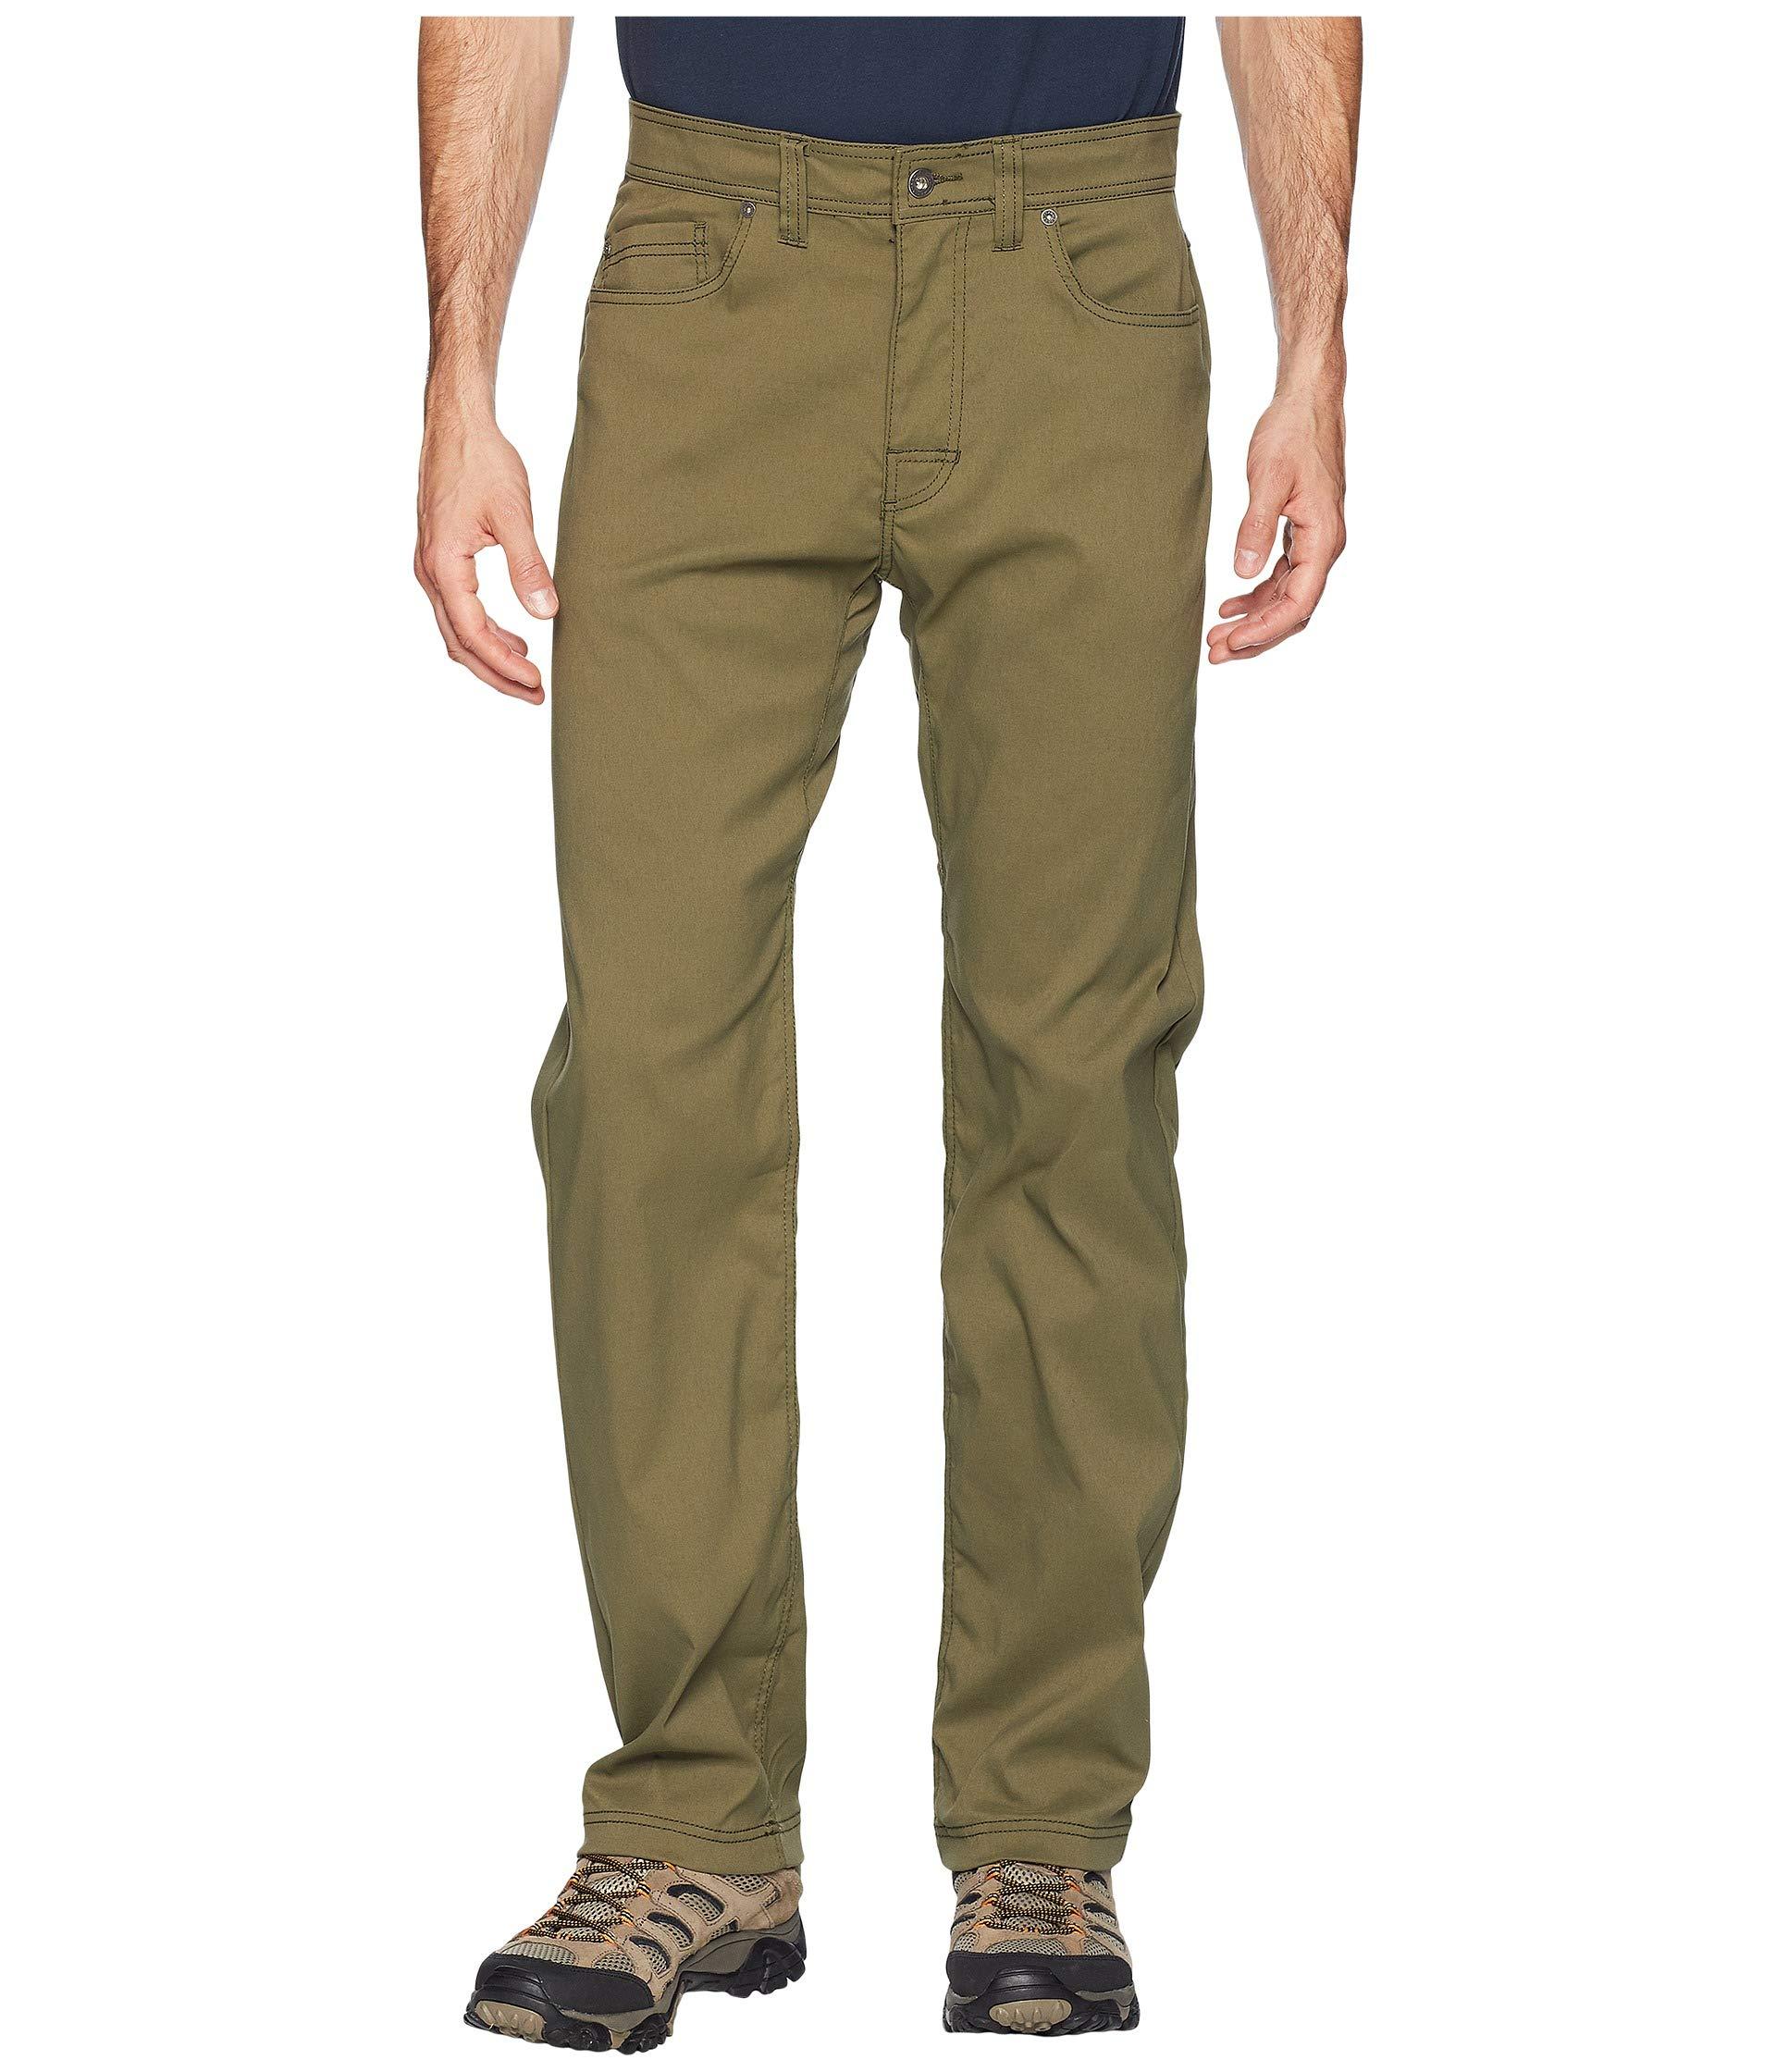 Prana Brion Pant in Cargo Green (Green) for Men - Lyst